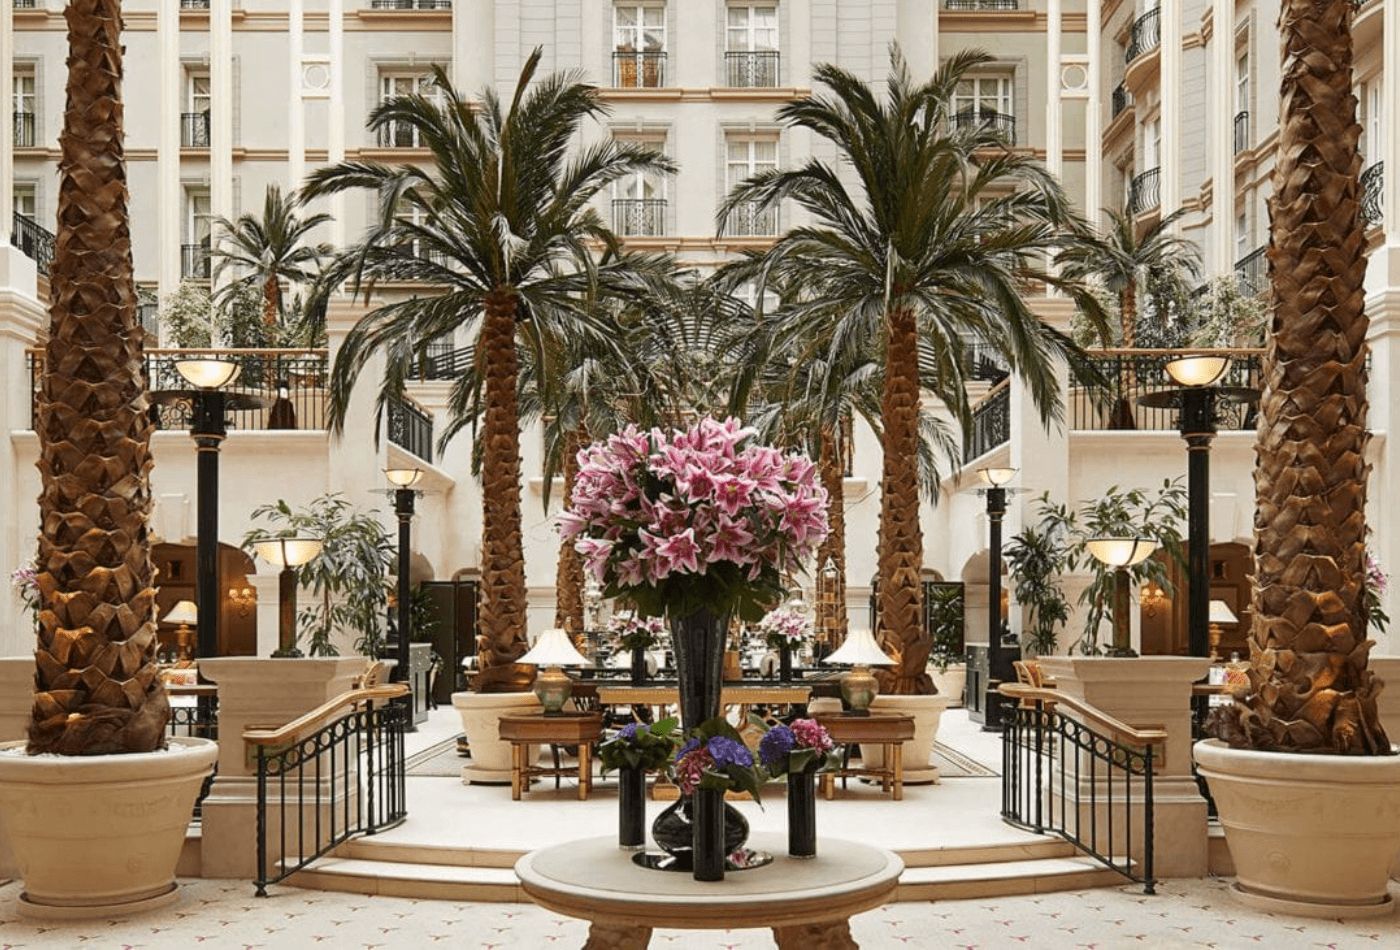 Palm trees and lillys in reception area.jpg